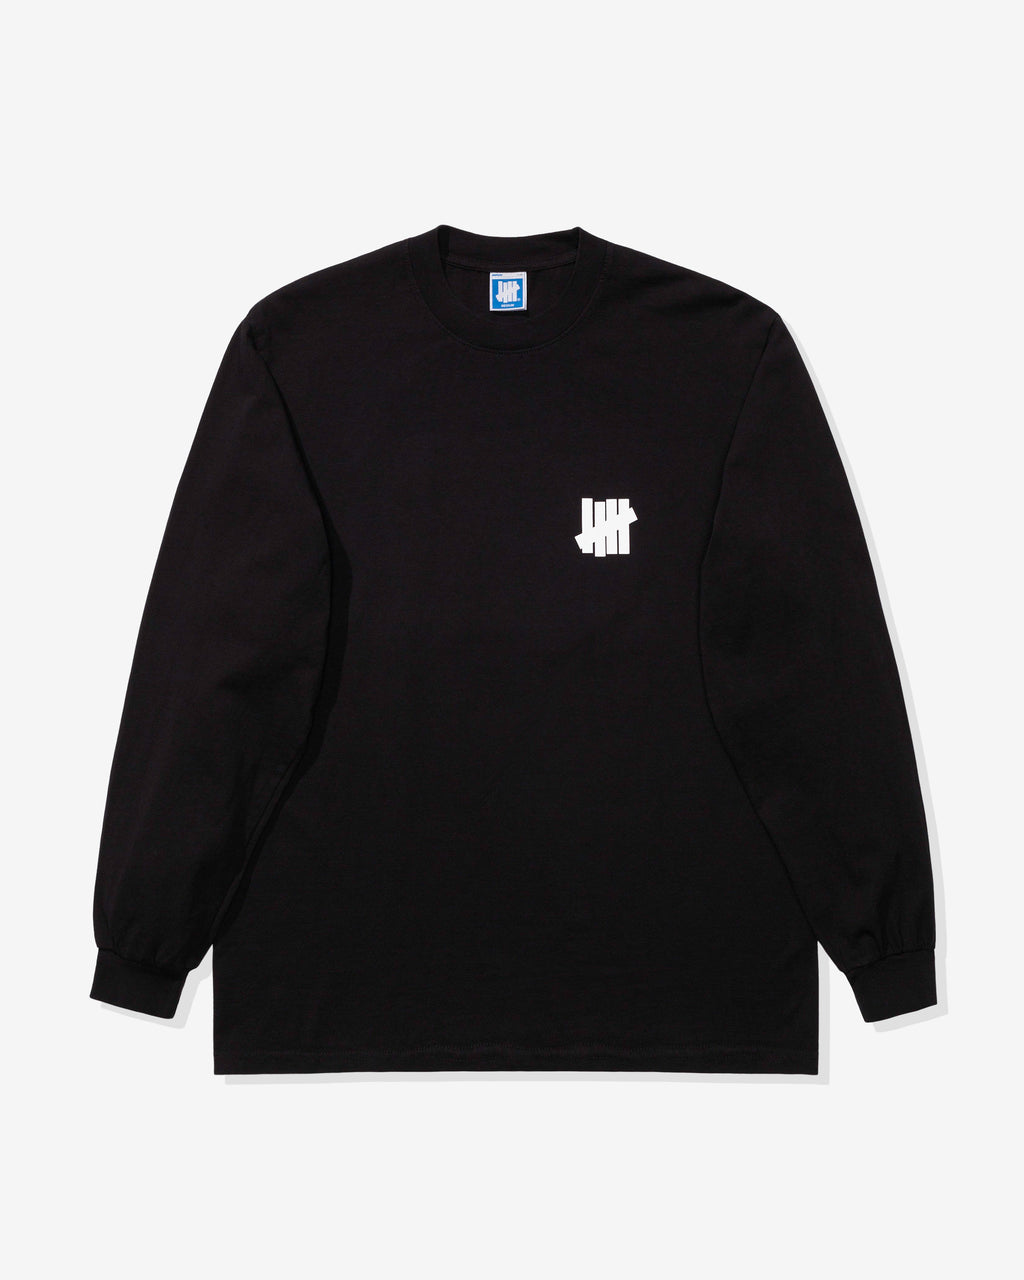 UNDEFEATED - CHAMPION別注 UNDEFEATED ICON LOGO ANORAKの+stbp.com.br